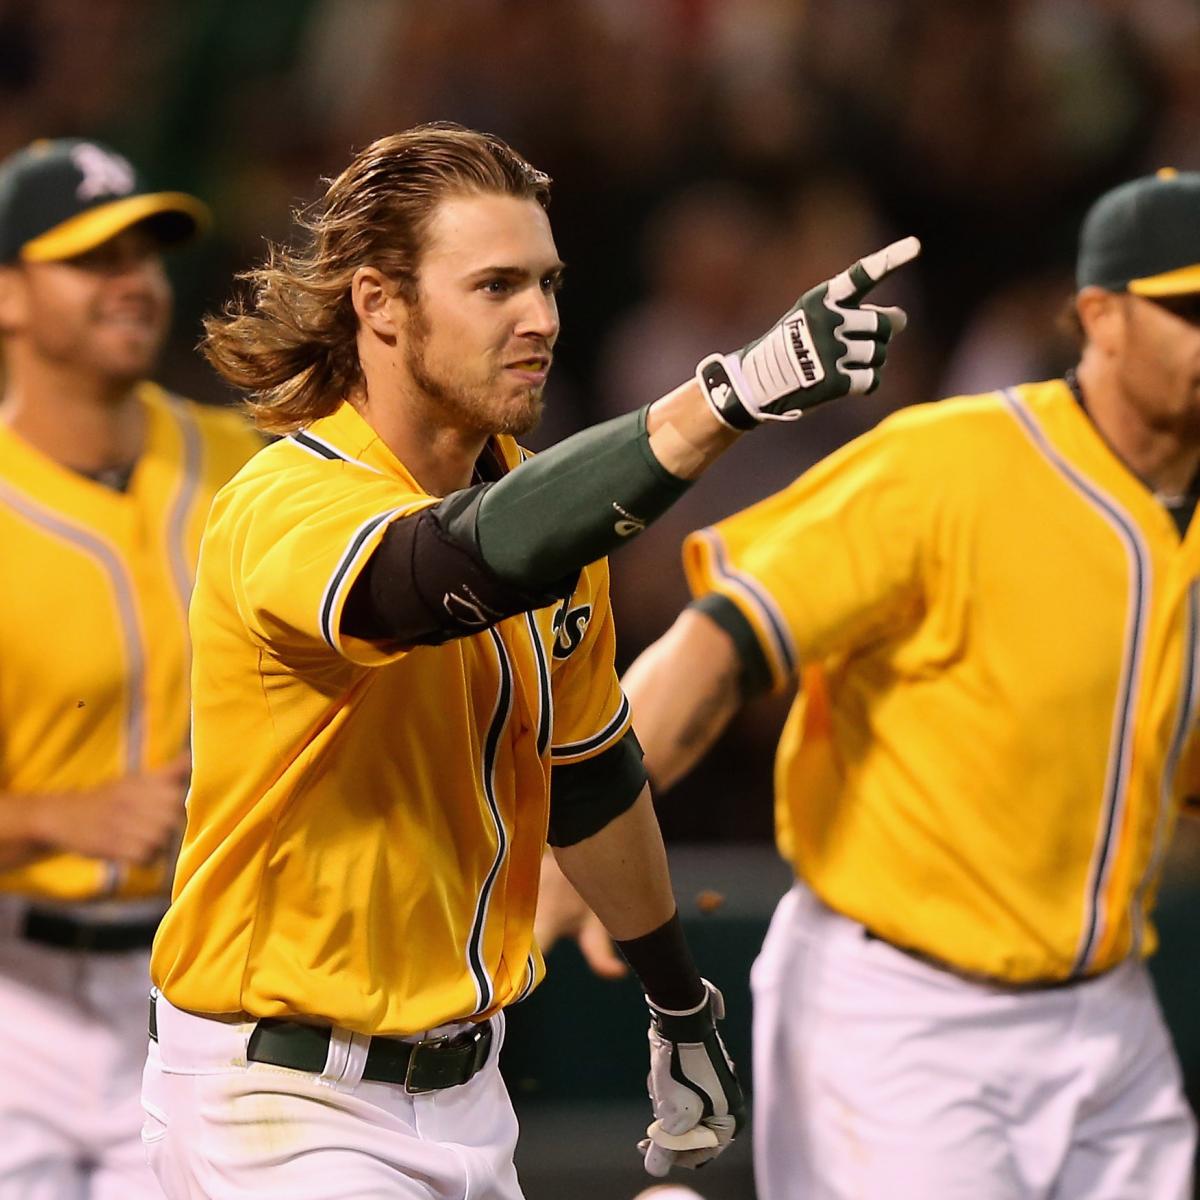 Oakland Athletics Go into the AllStar Break with a Winning Record of